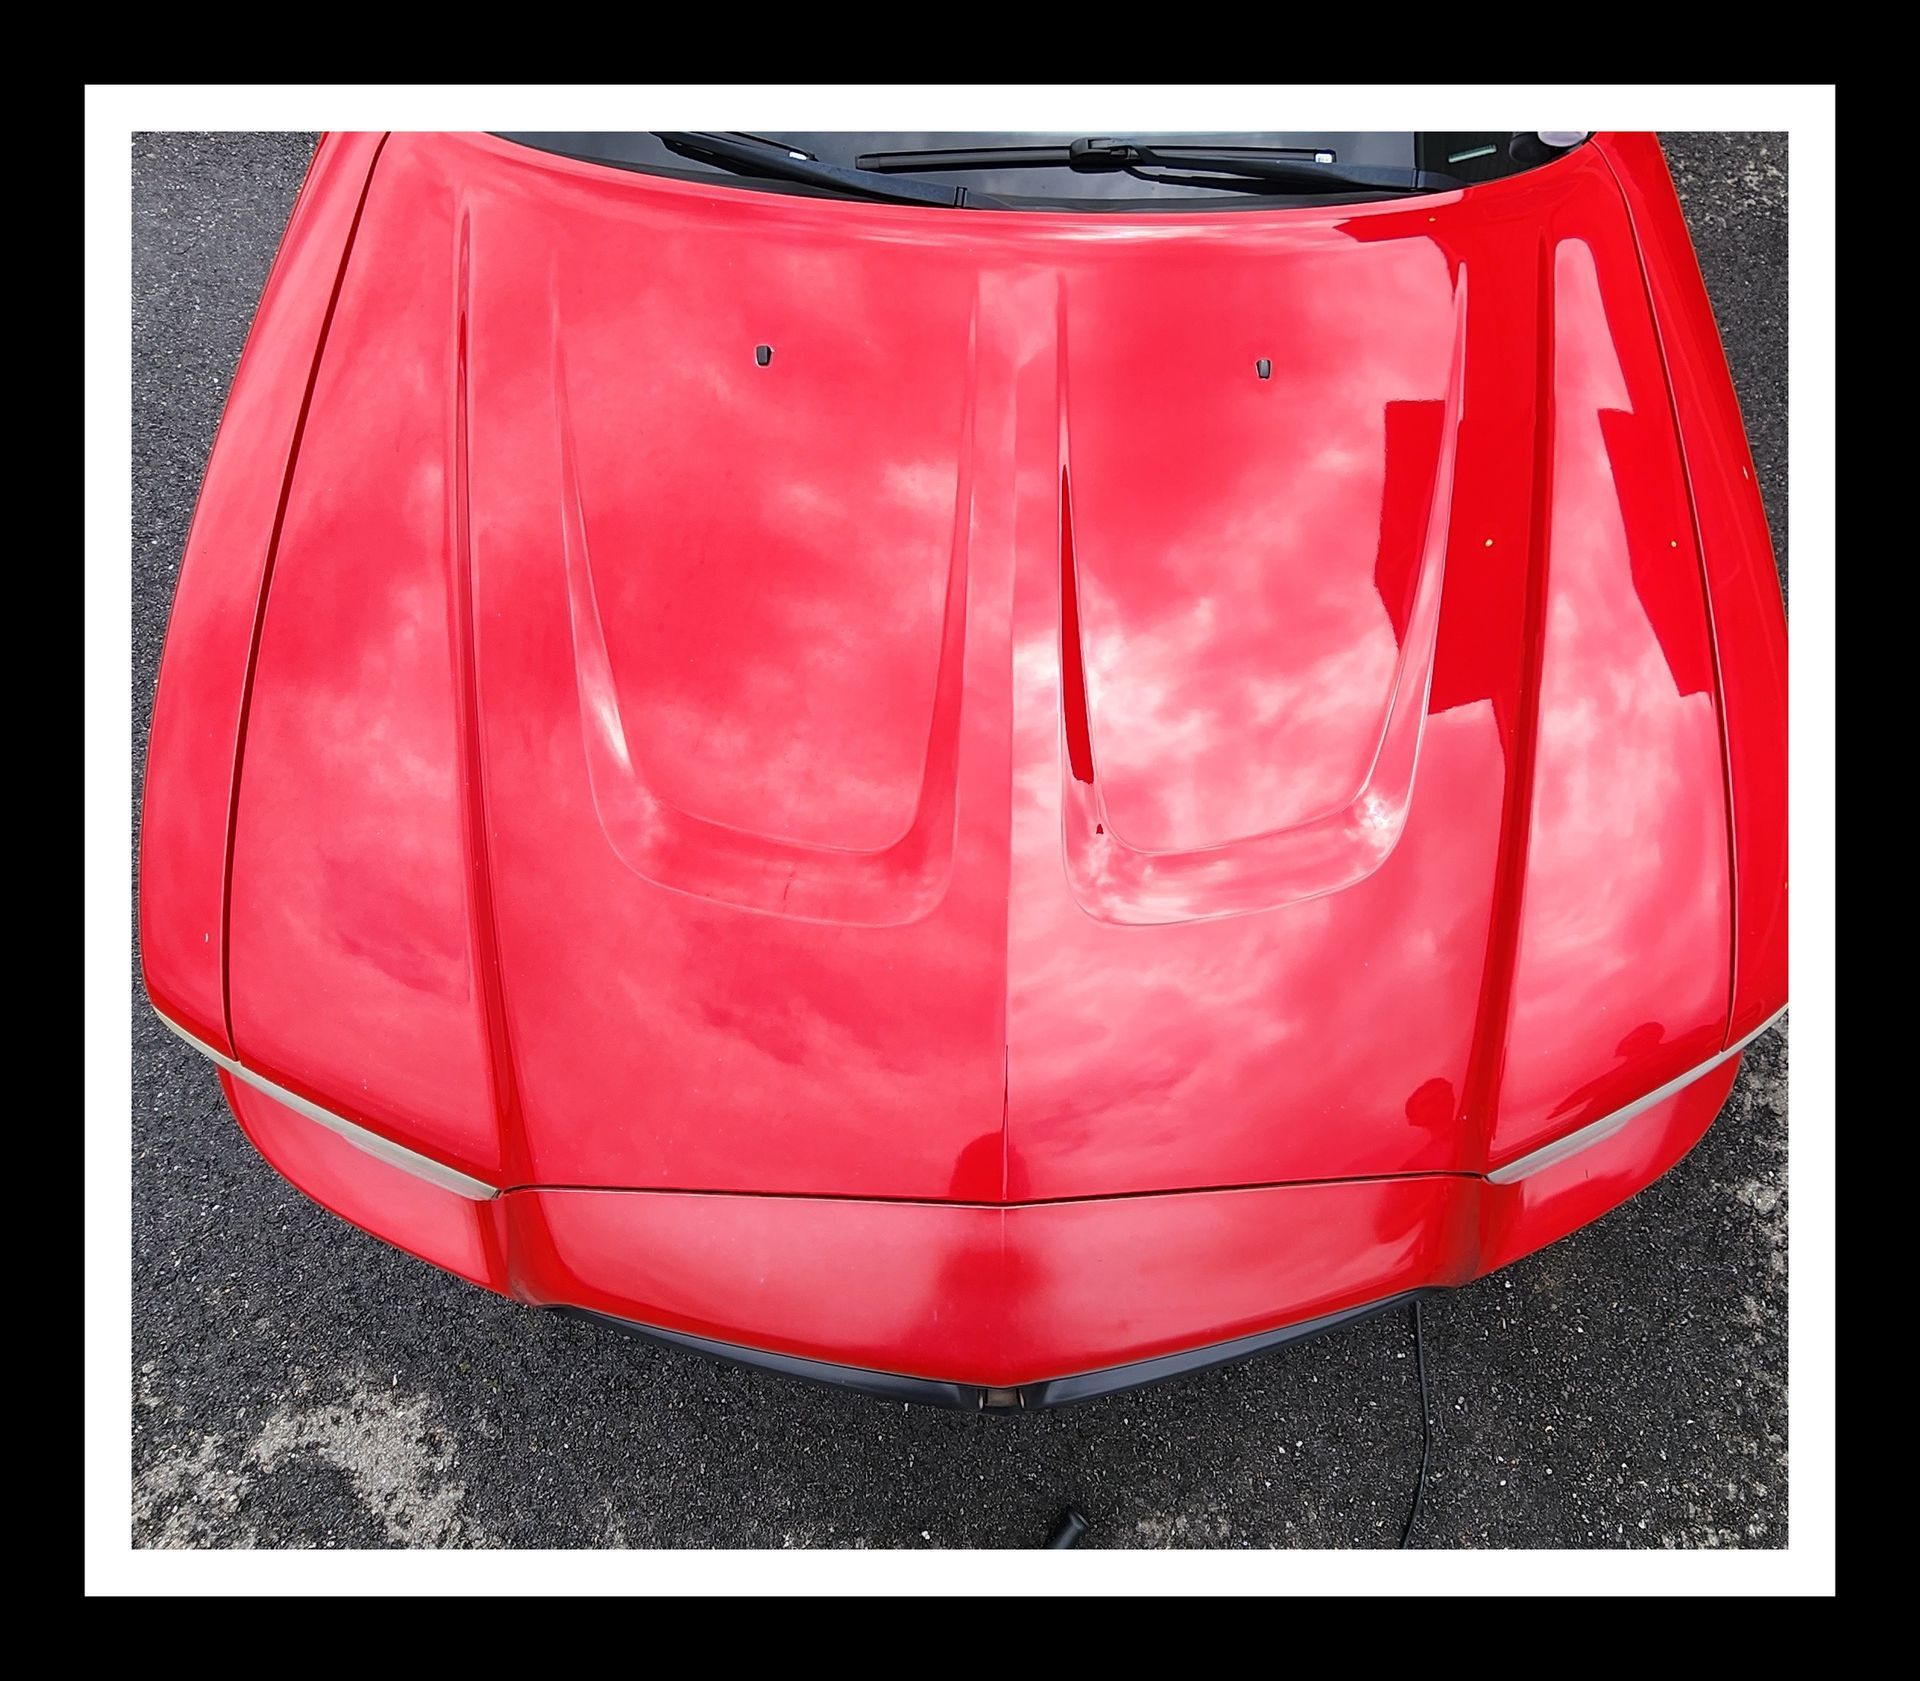 The hood of a red car is shown from above